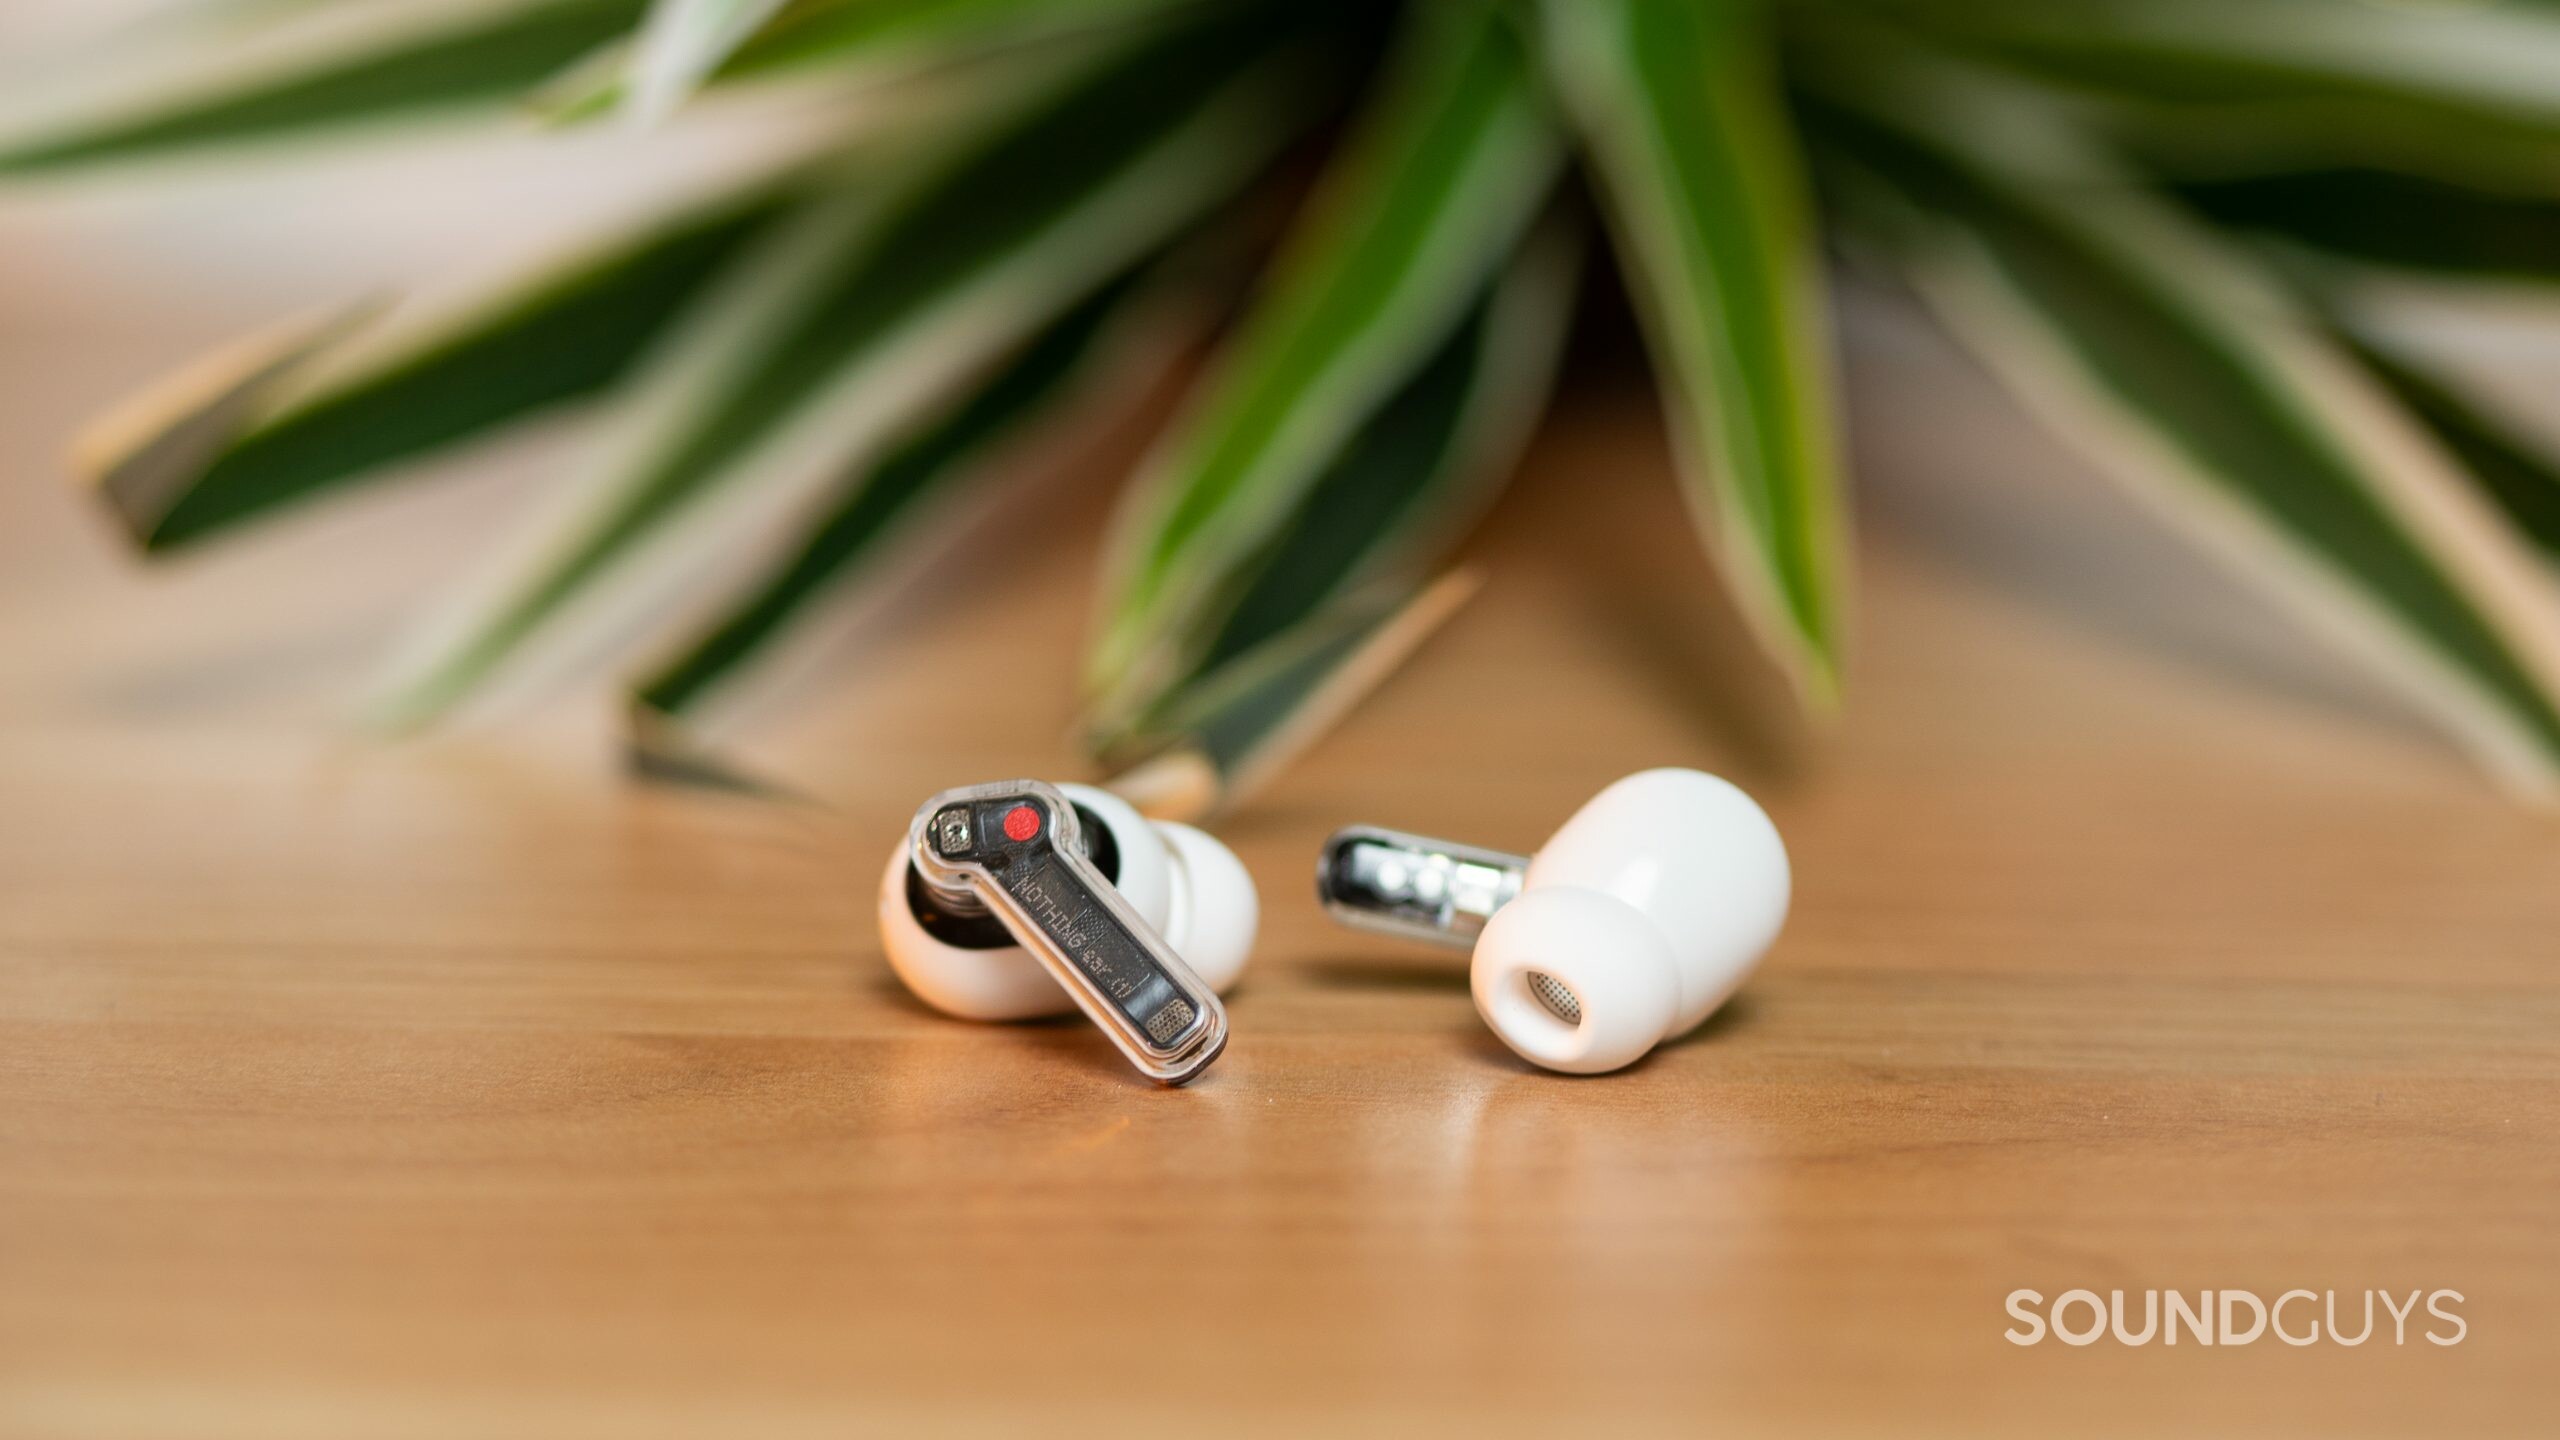 The Nothing Ear 1 earbuds lie flat on a wood table.